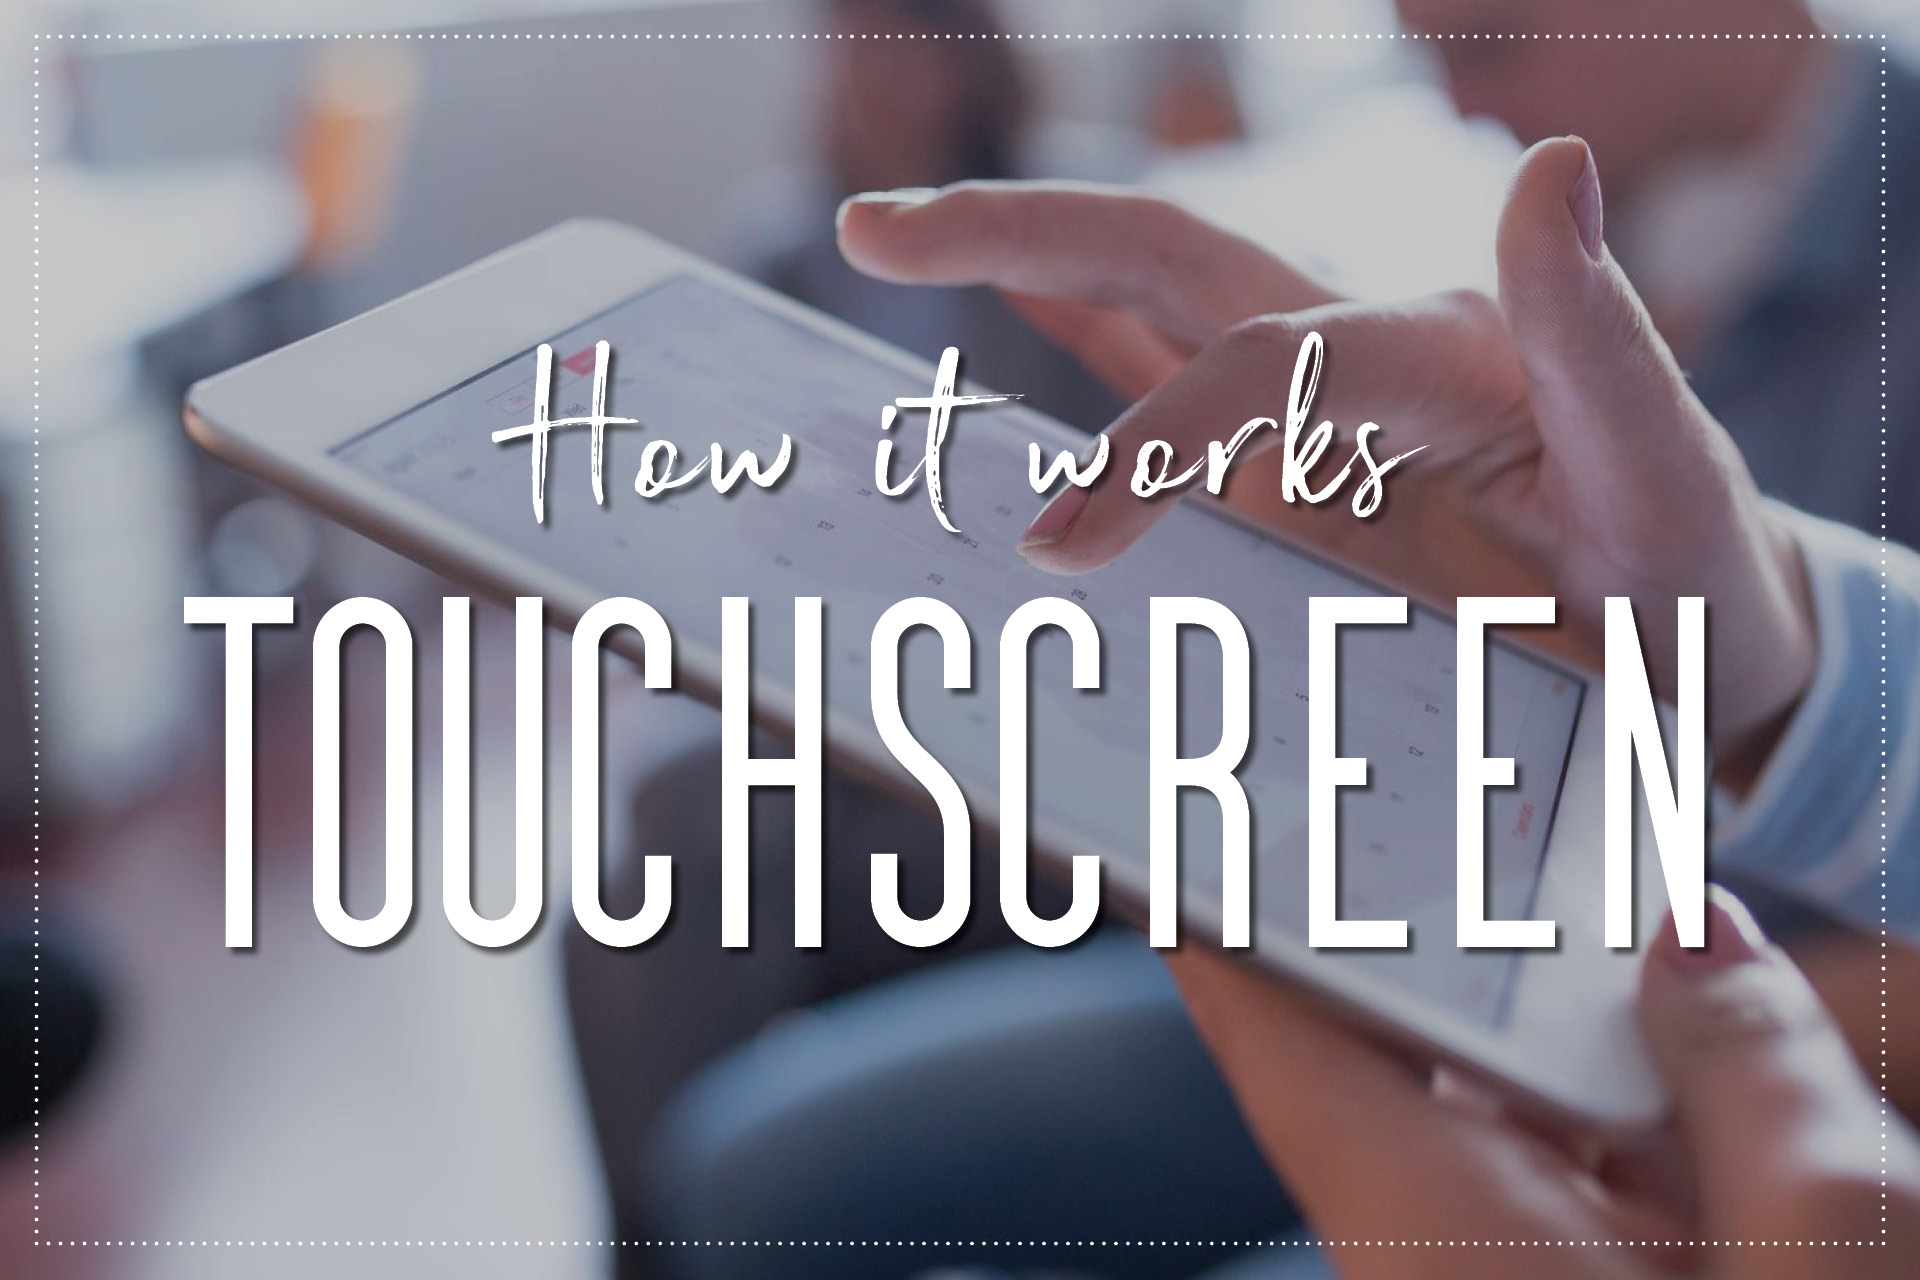 How Touchscreens Work: The Fascinating Science Behind